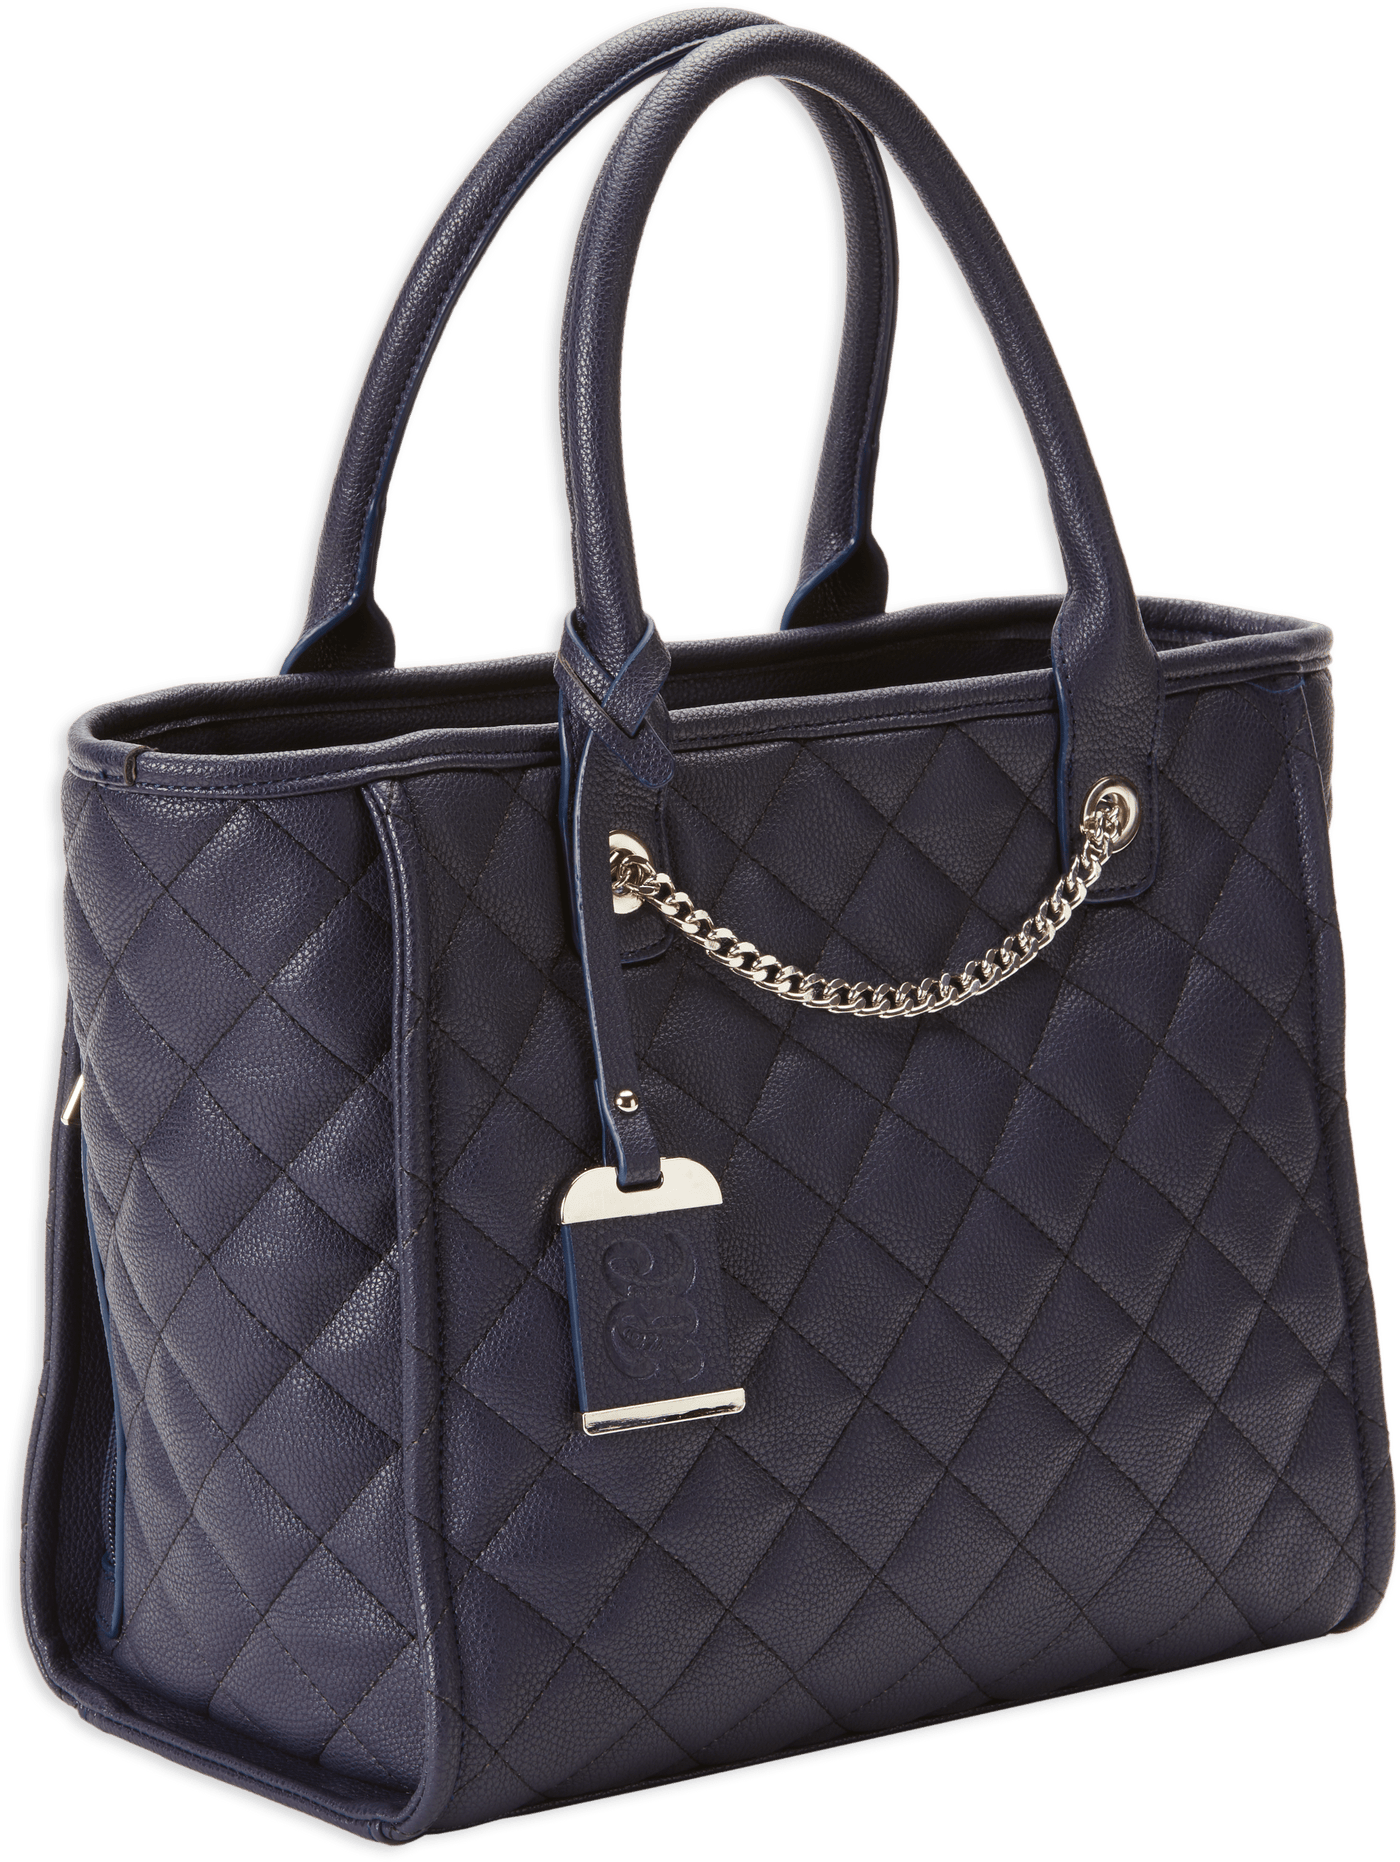 Bulldog Bulldog Concealed Carry Purse - Quilted Tote Style Navy Concealed Carry Handbags